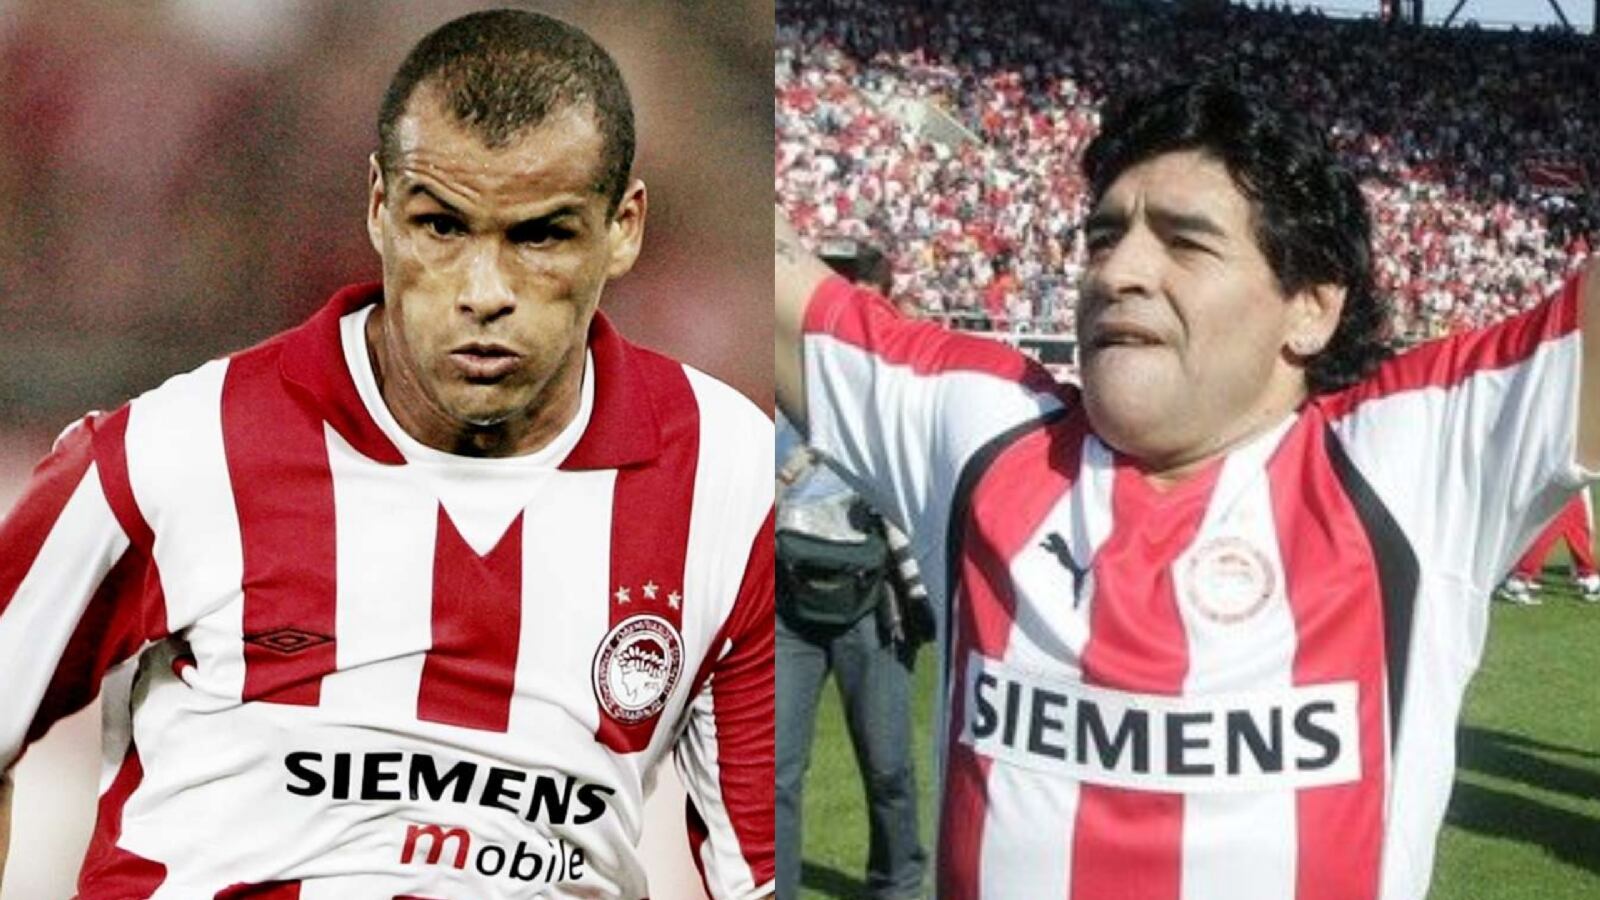 The incredible story of a Mexican legend that played with Diego Maradona and Rivaldo at the same time